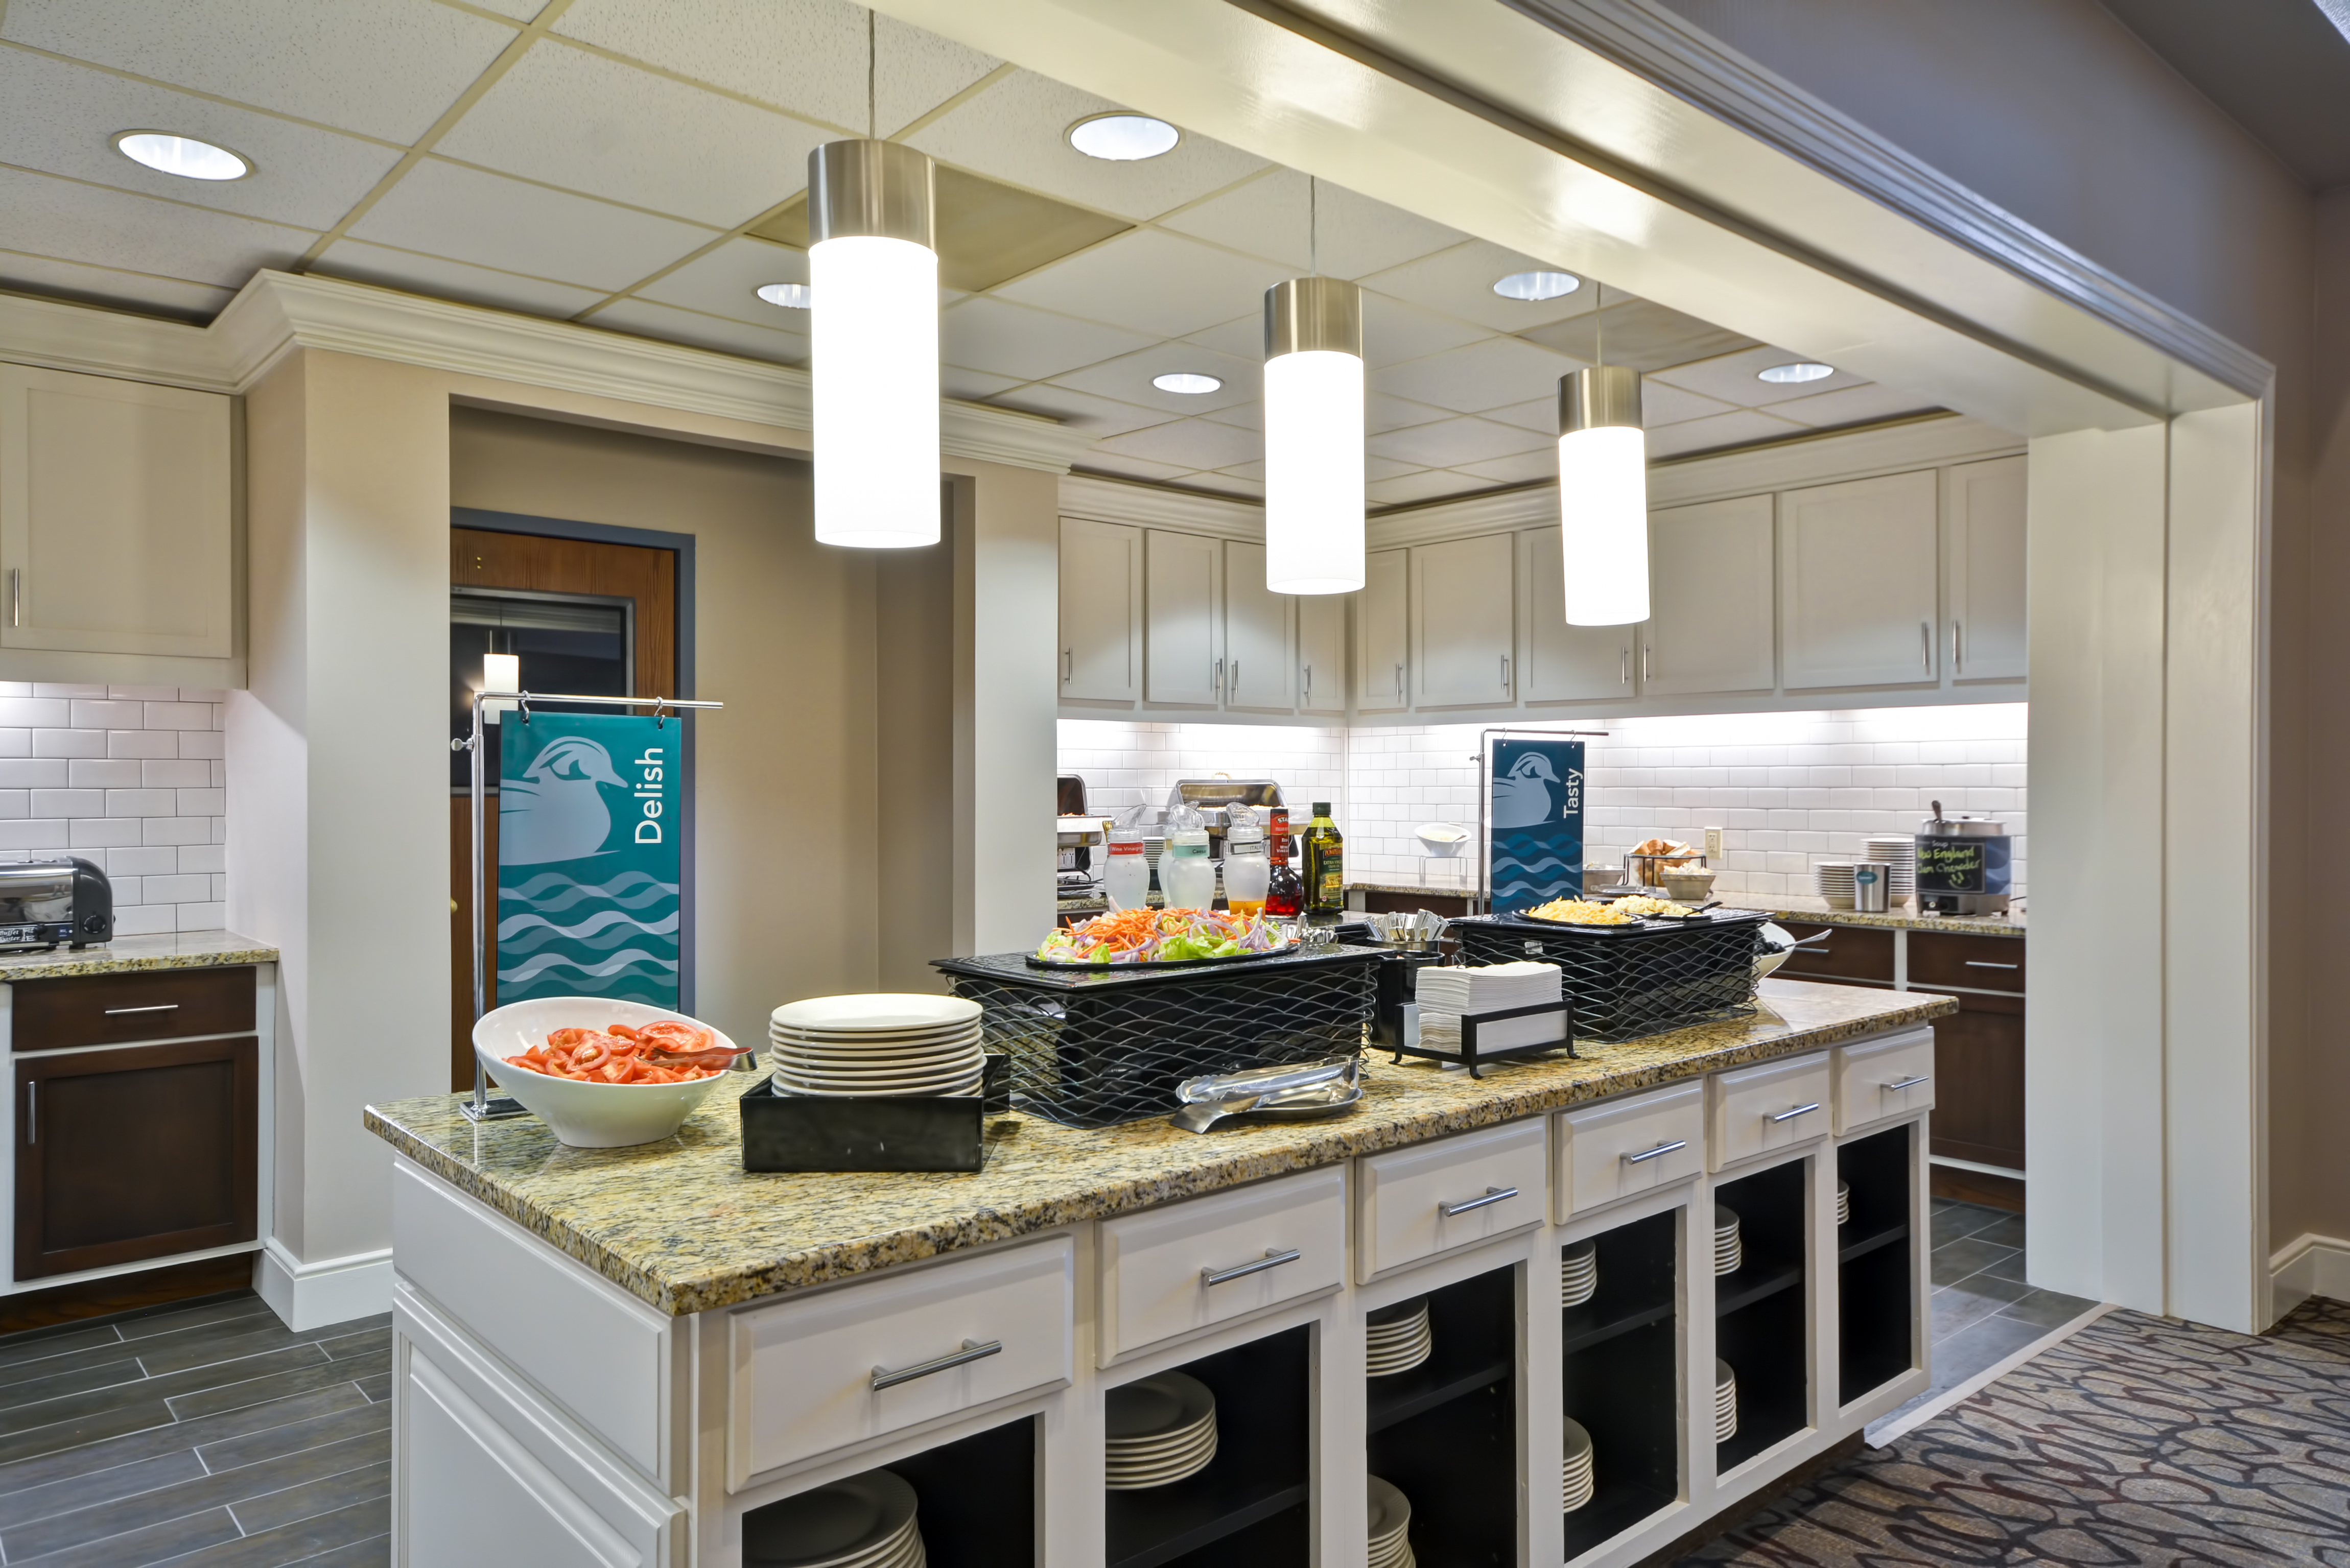 Food and Beverage serving area with food selections coffee, juice, snacks, vegetables, and dining amenities